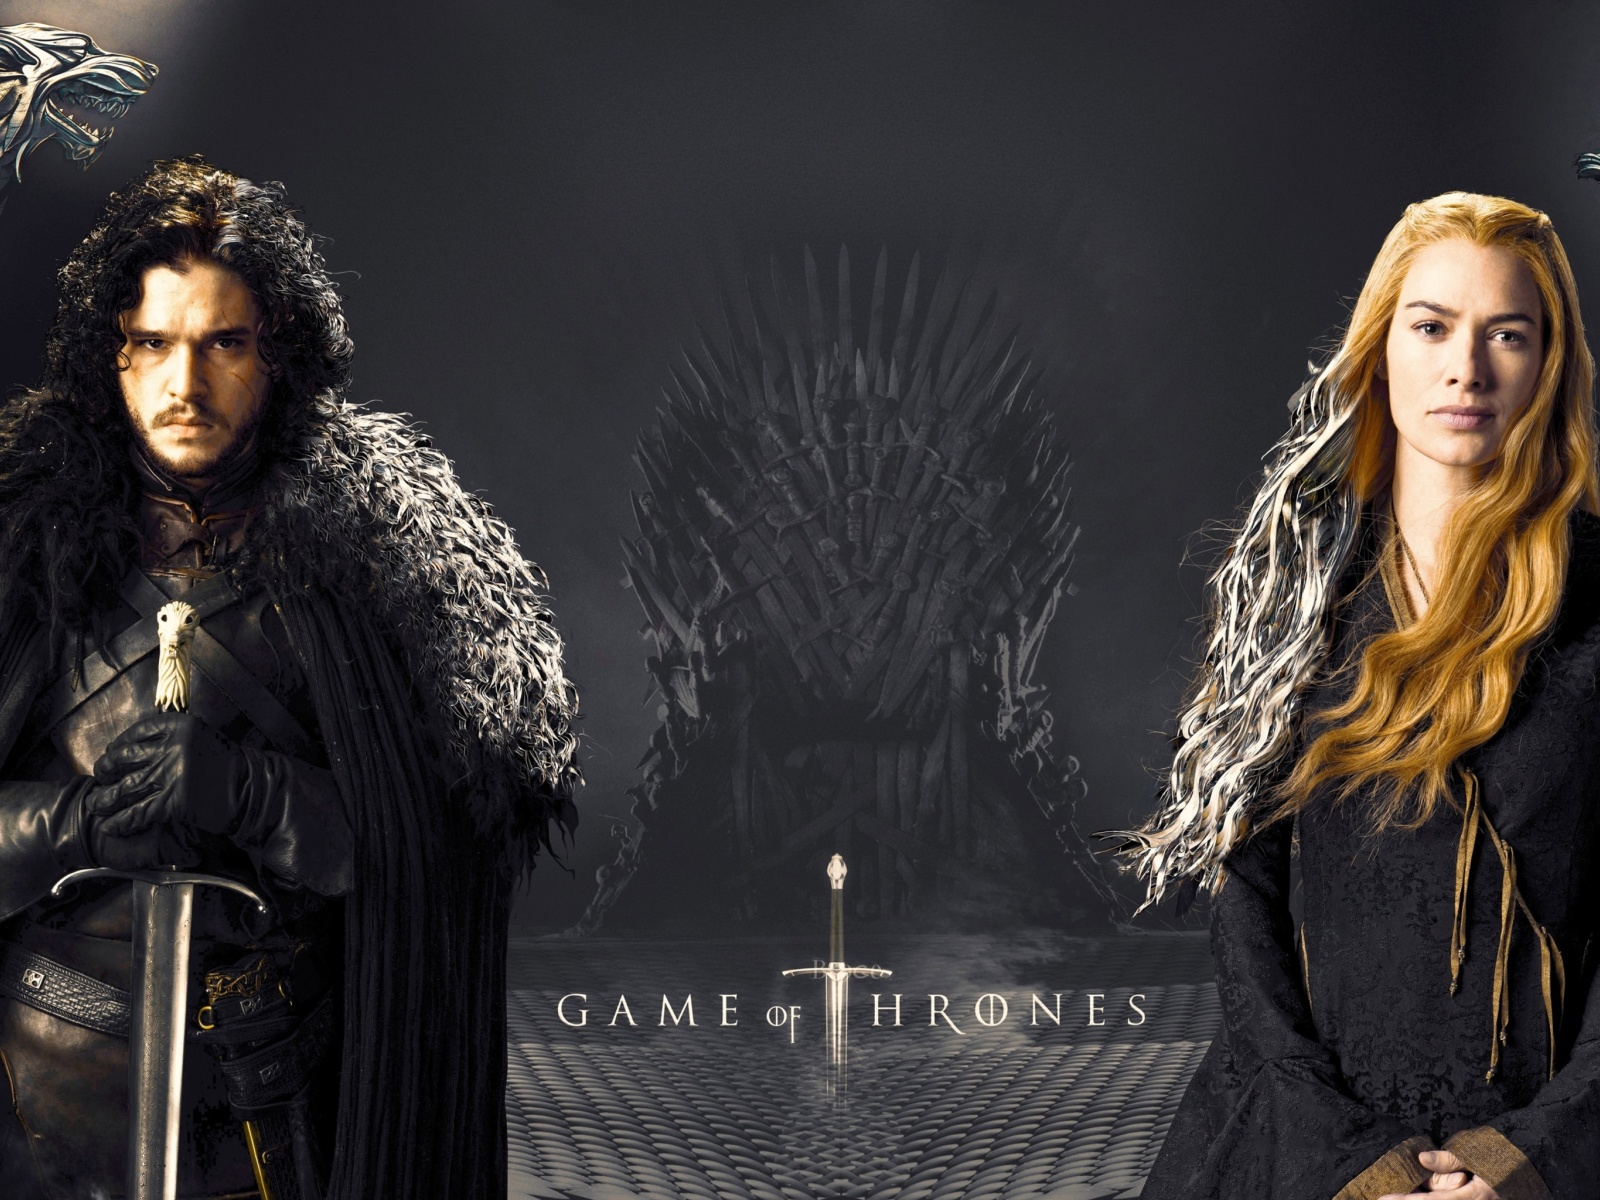 Game Of Thrones actors Jon Snow and Cersei Lannister screenshot #1 1600x1200